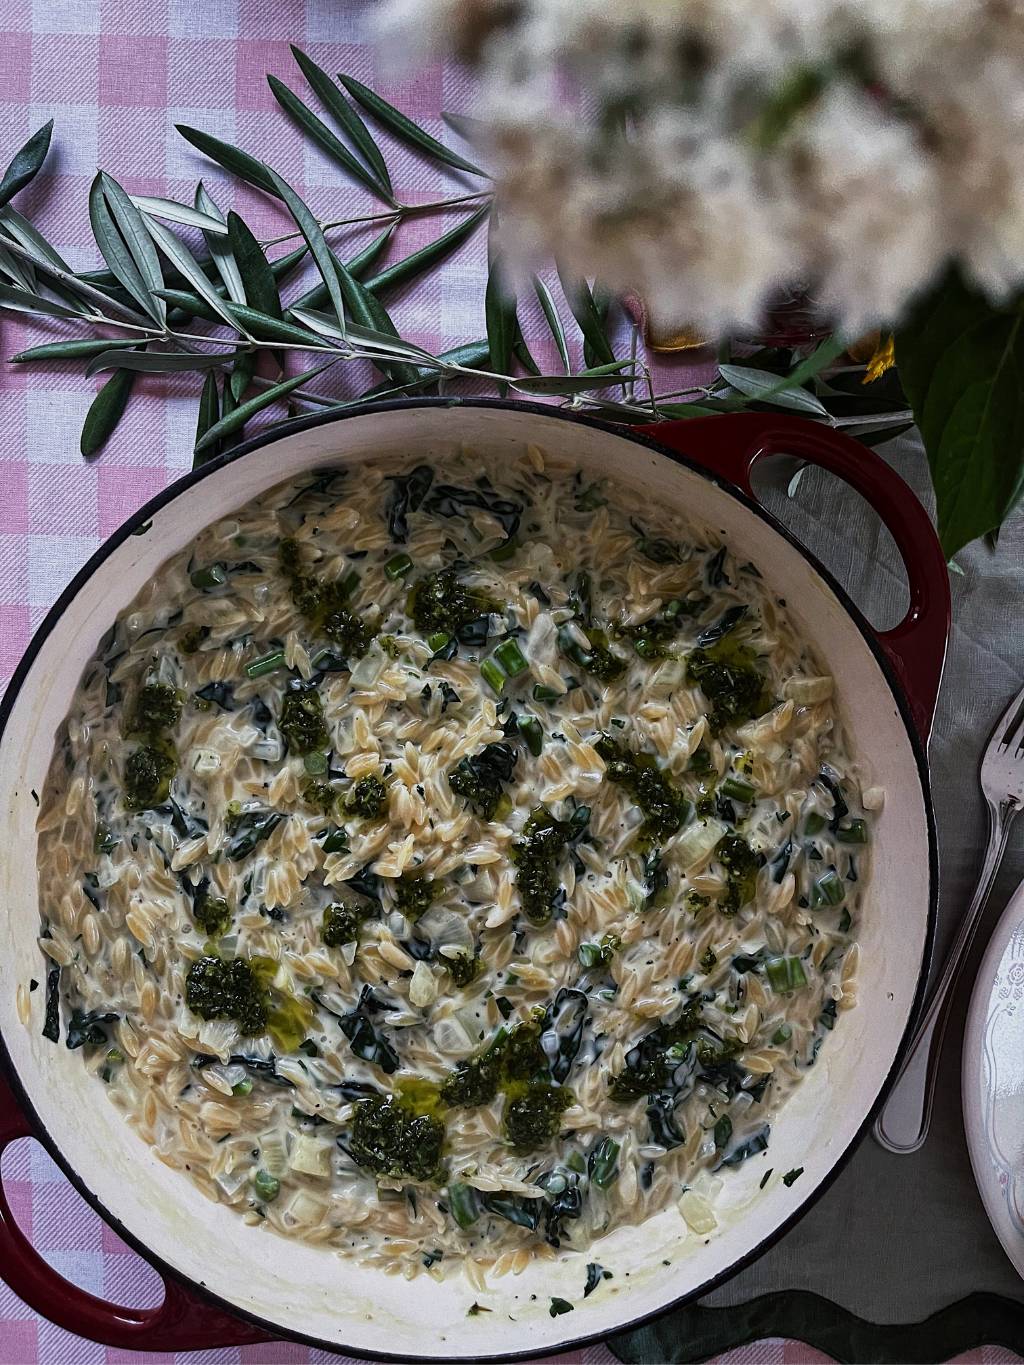 Creamy Herb Orzo with a Garlic & Herb Oil